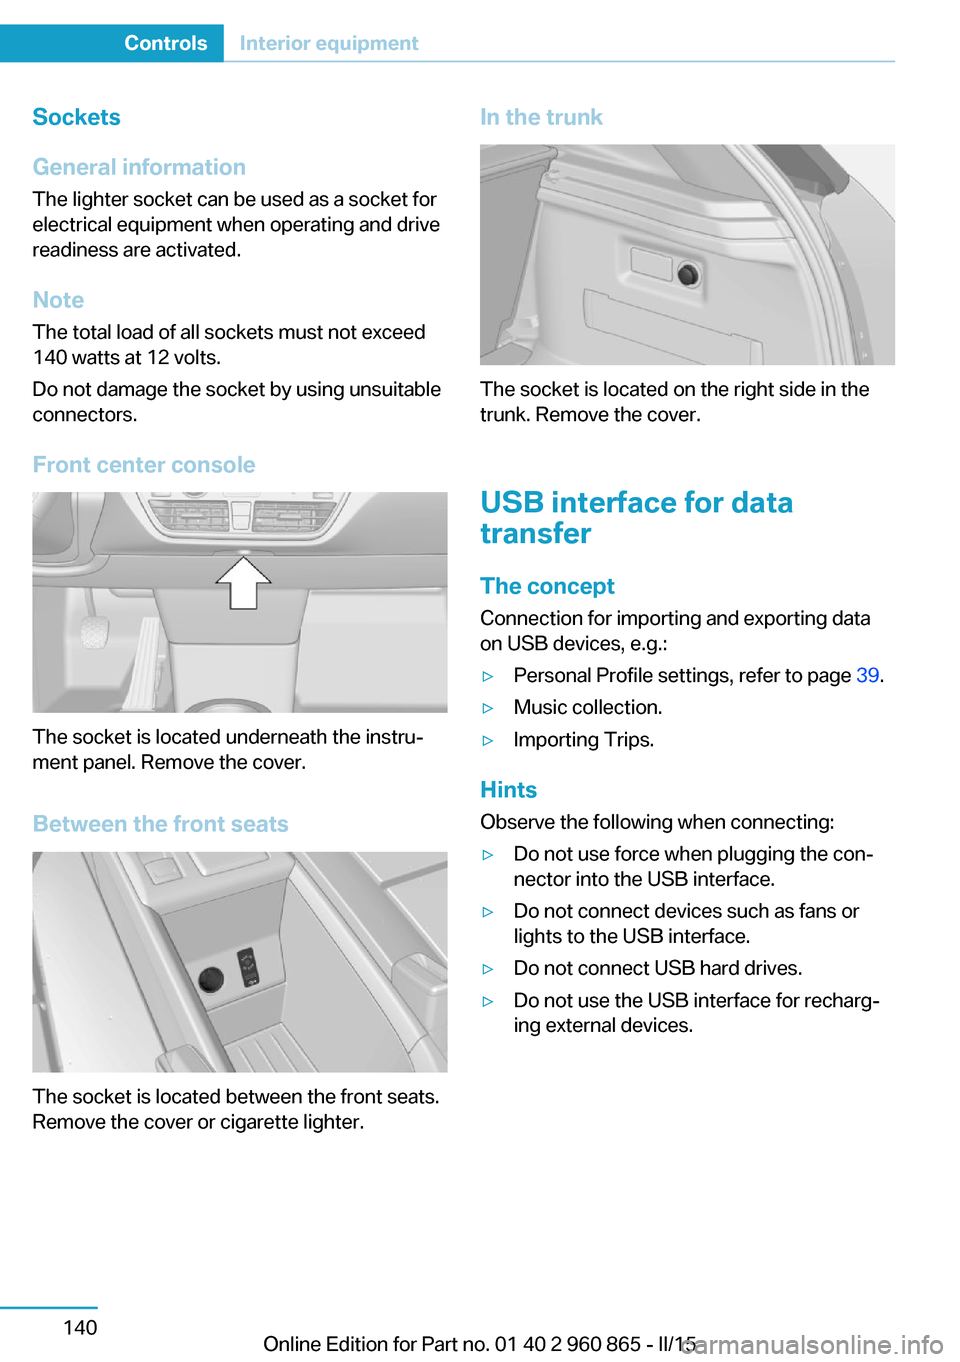 BMW I3 2015 I01 Owners Manual Sockets
General information
The lighter socket can be used as a socket for
electrical equipment when operating and drive
readiness are activated.
Note
The total load of all sockets must not exceed
140